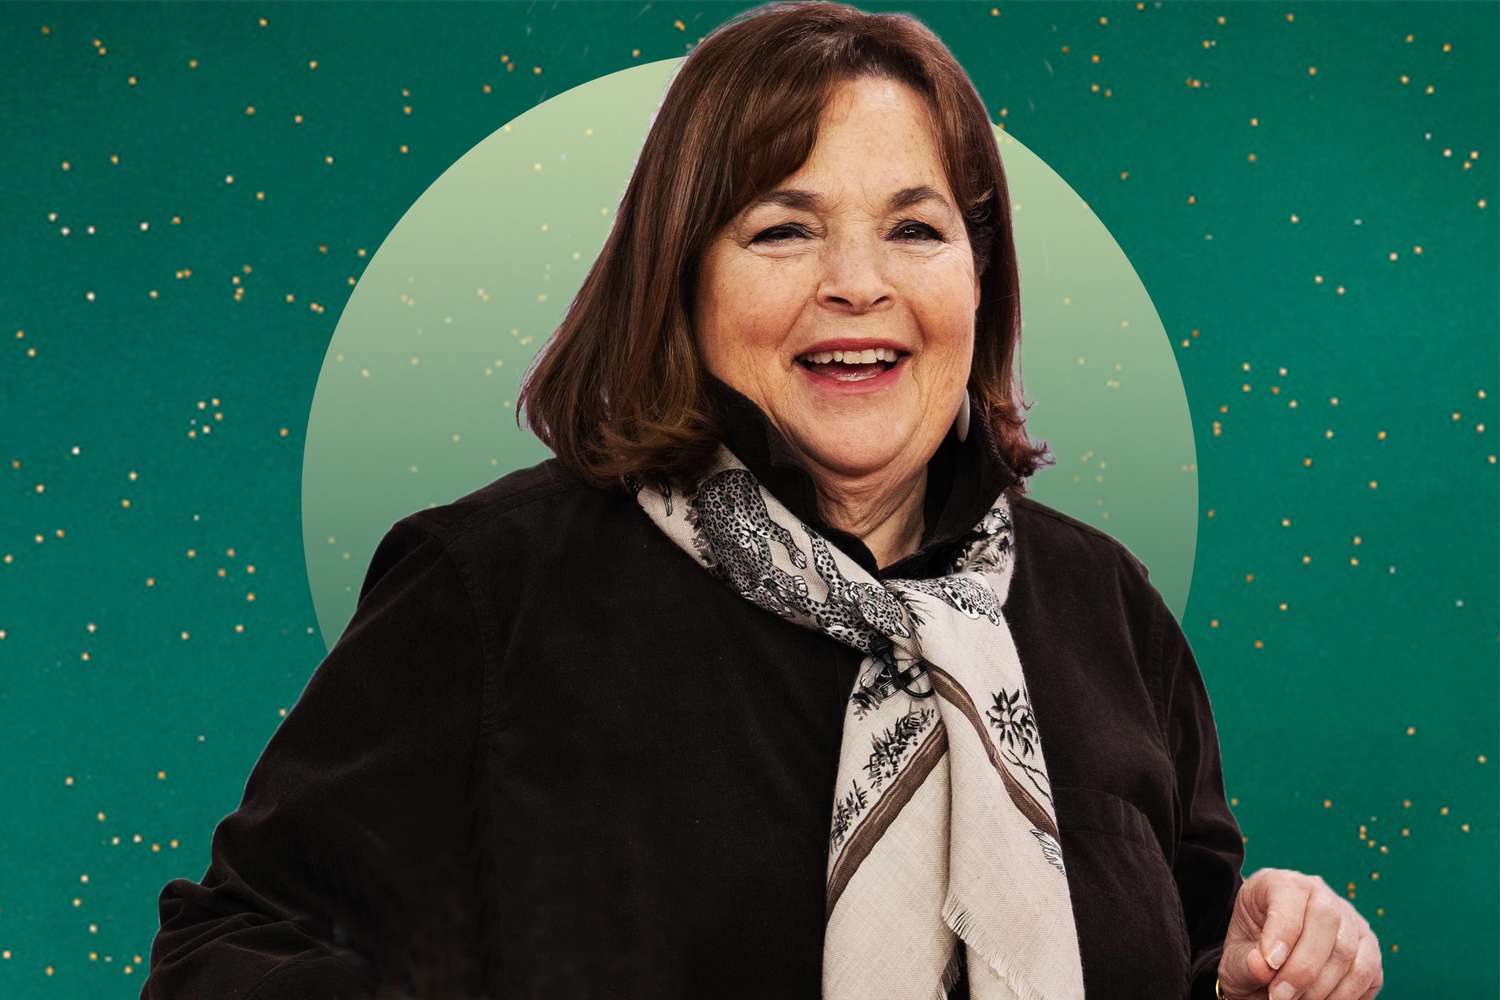 Ina Garten's Holiday Menu Is Packed with Mouthwatering Appetizers We Can't Wait to Try